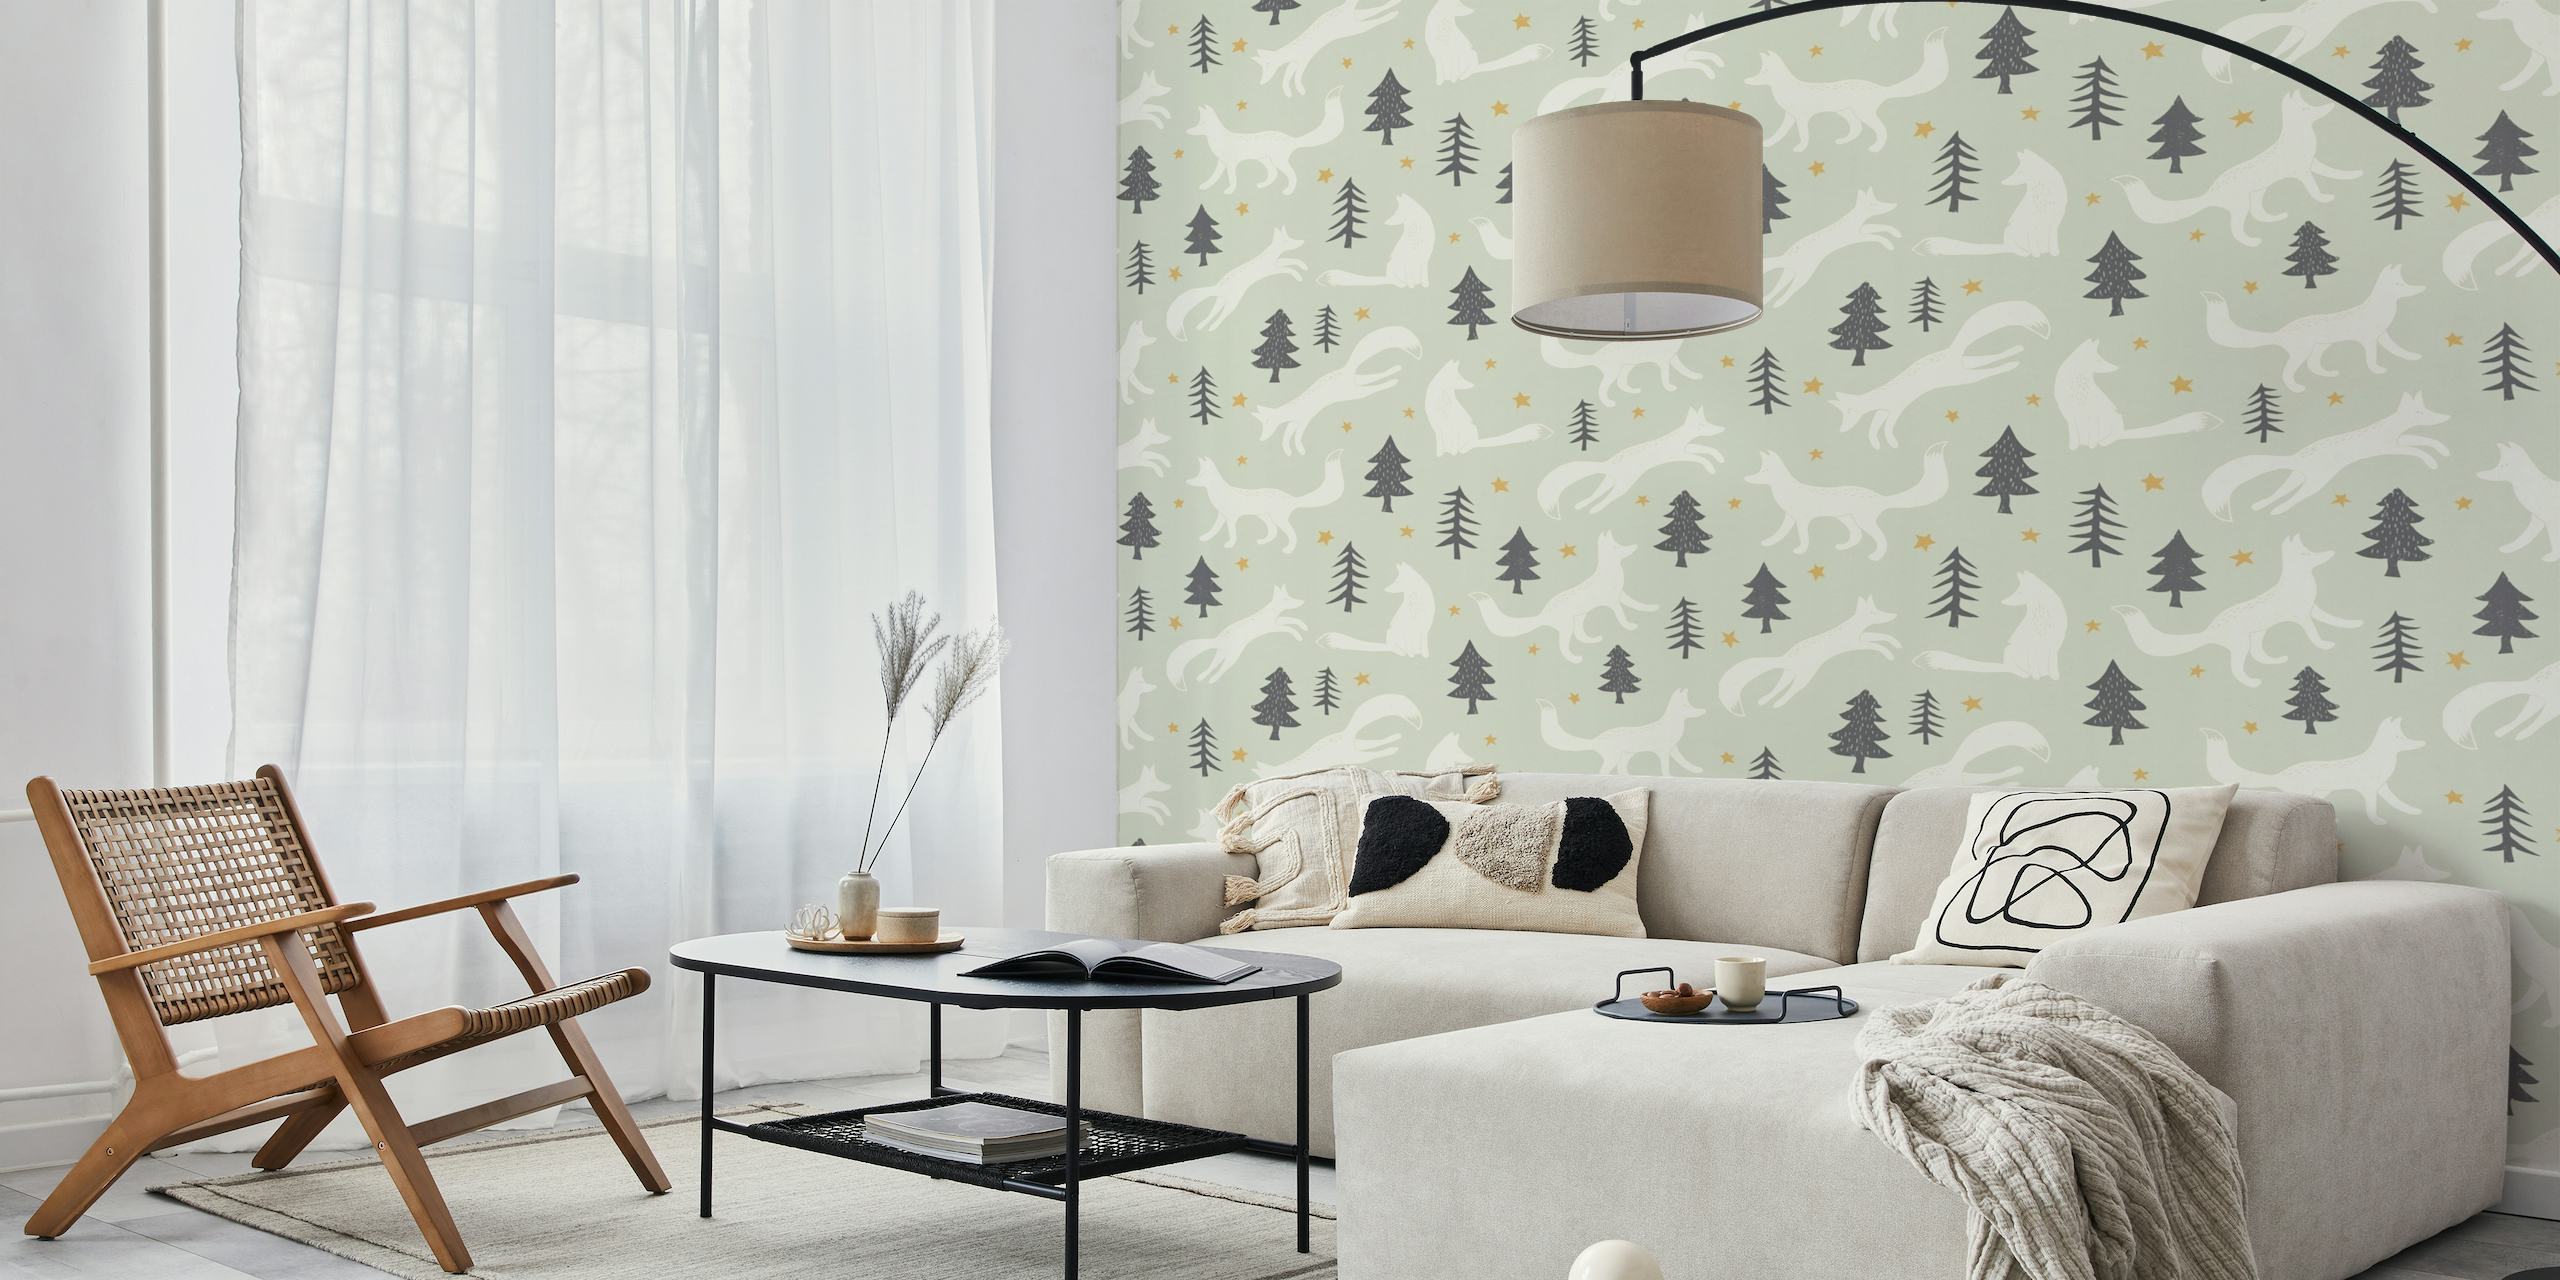 Nostalgic Foxes Pine Wall Mural with foxes and pine tree patterns on a muted green background